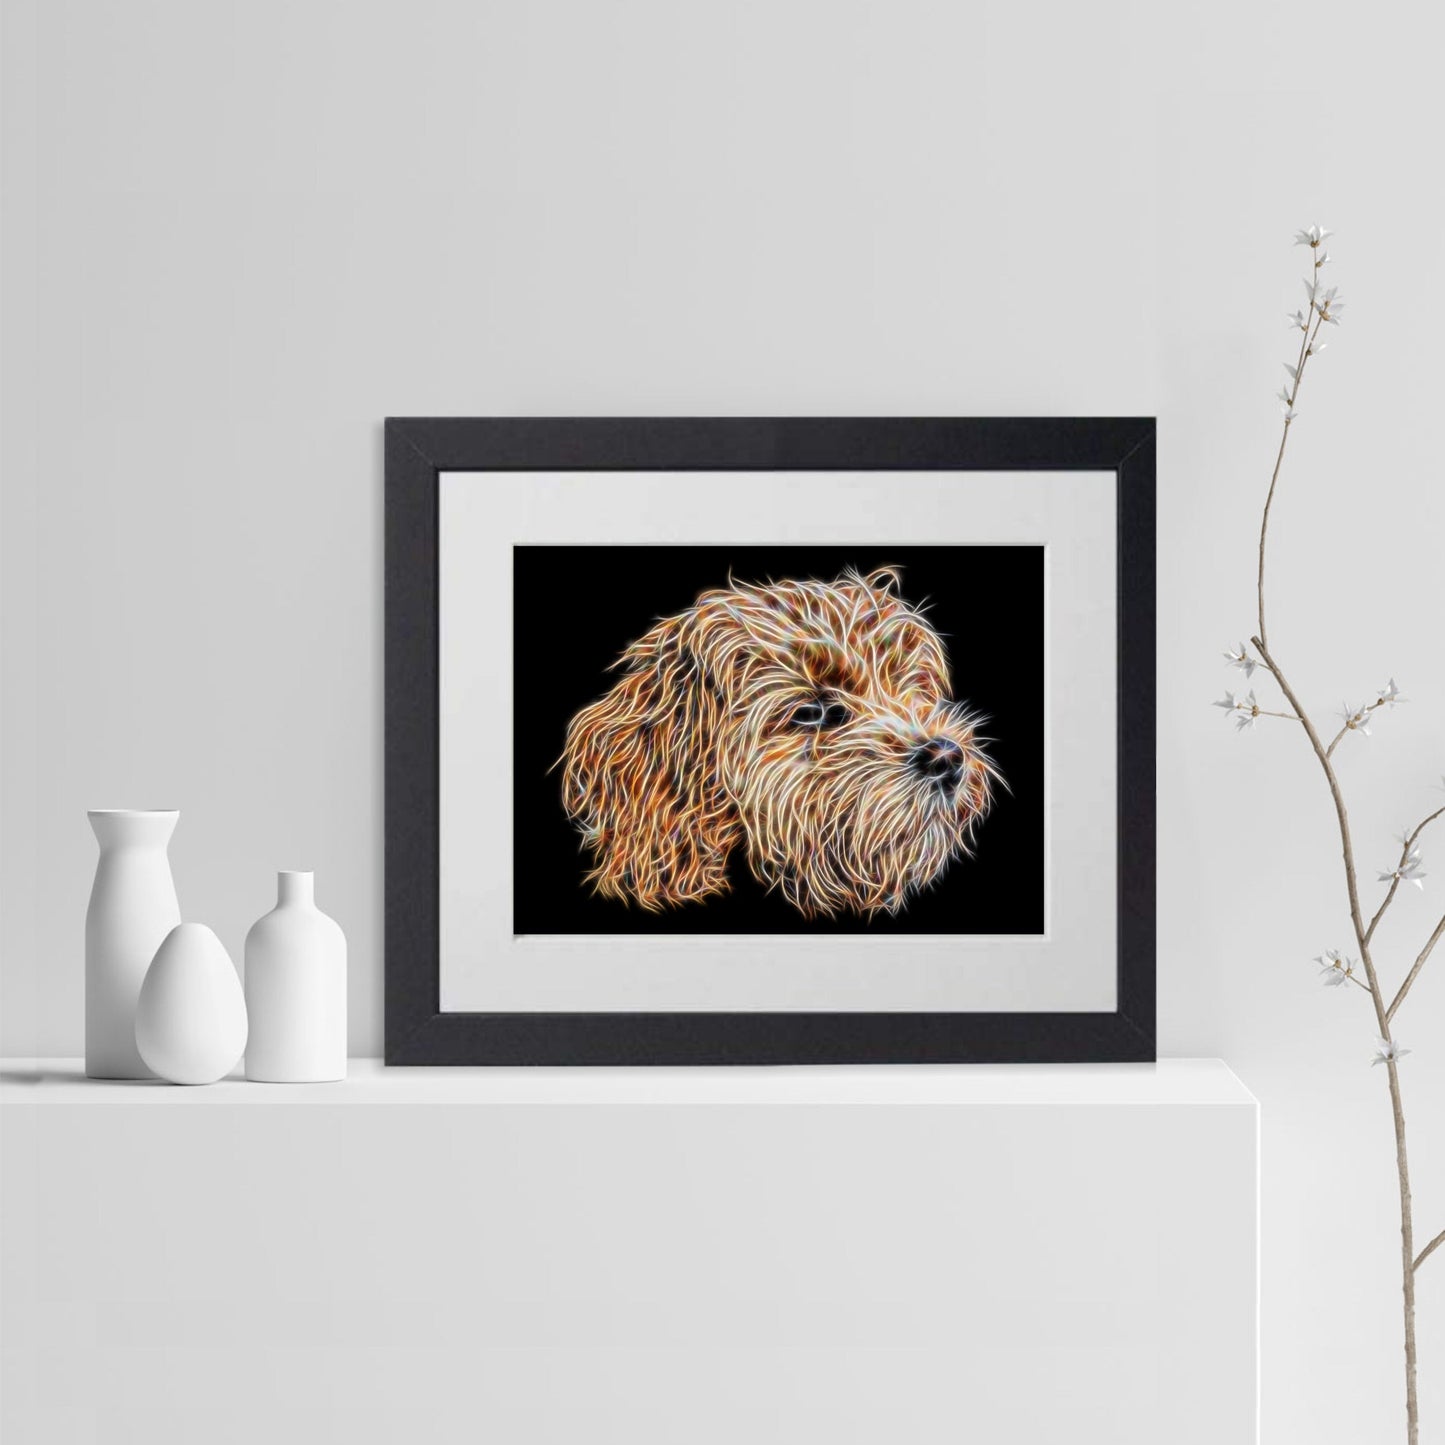 Apricot Cavapoo Print with Stunning Fractal Art Design. Various Sizes Available